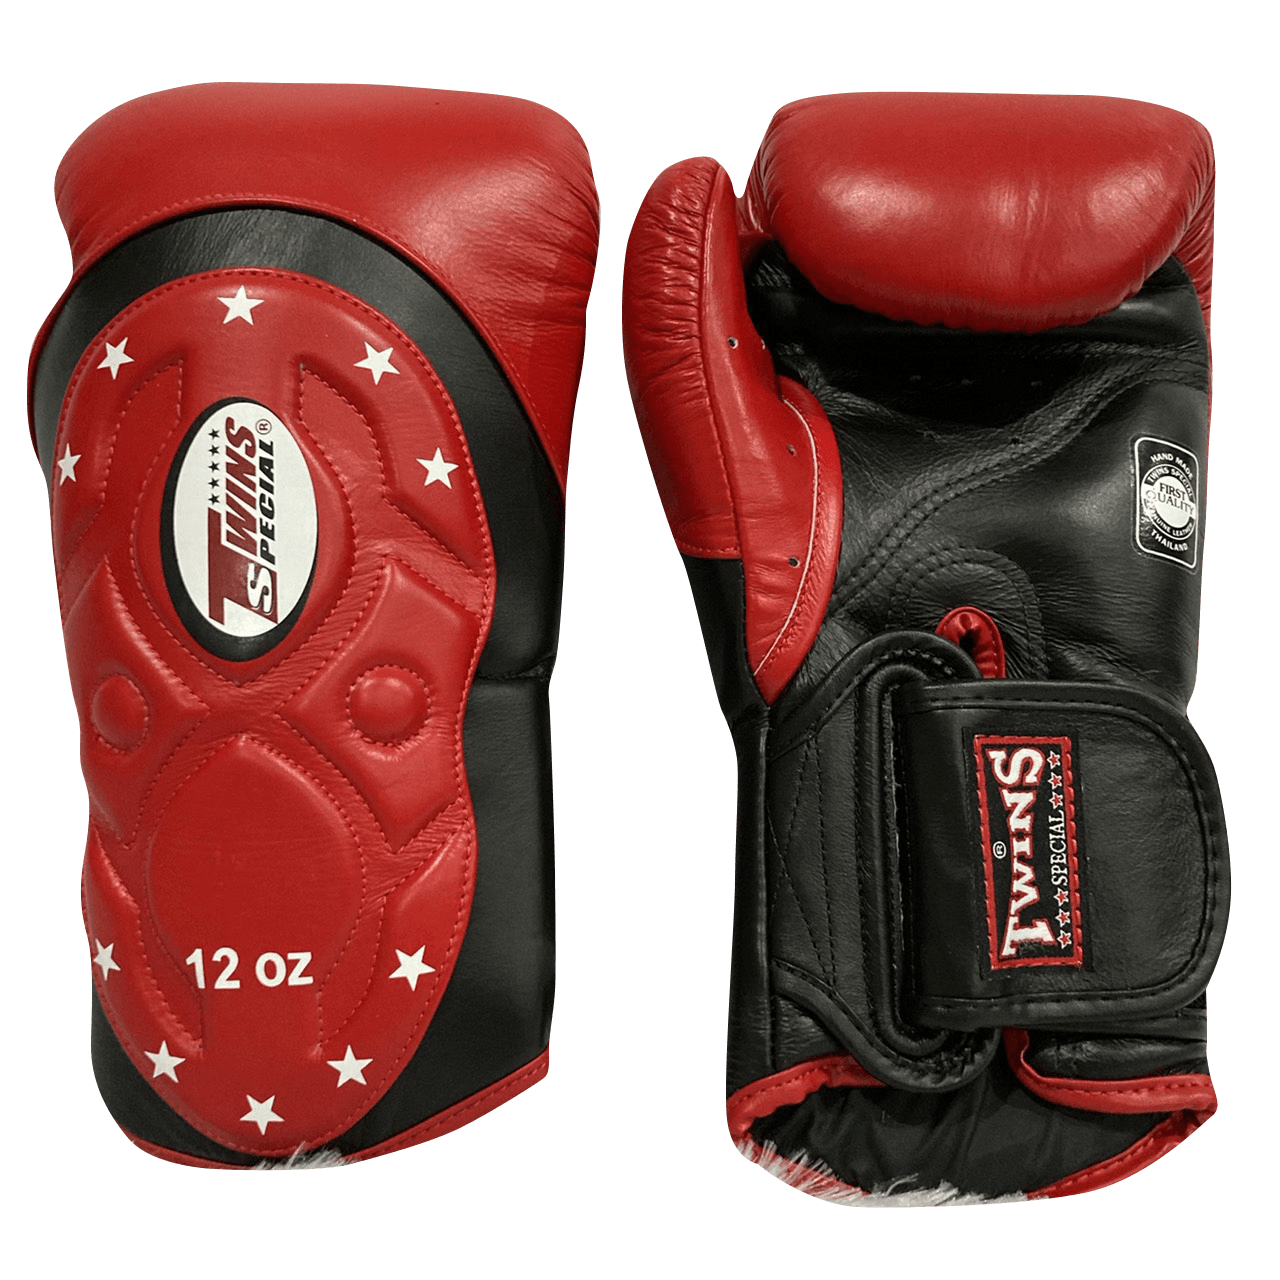 Twins Special BGVL6 Black Red MK  Boxing Gloves